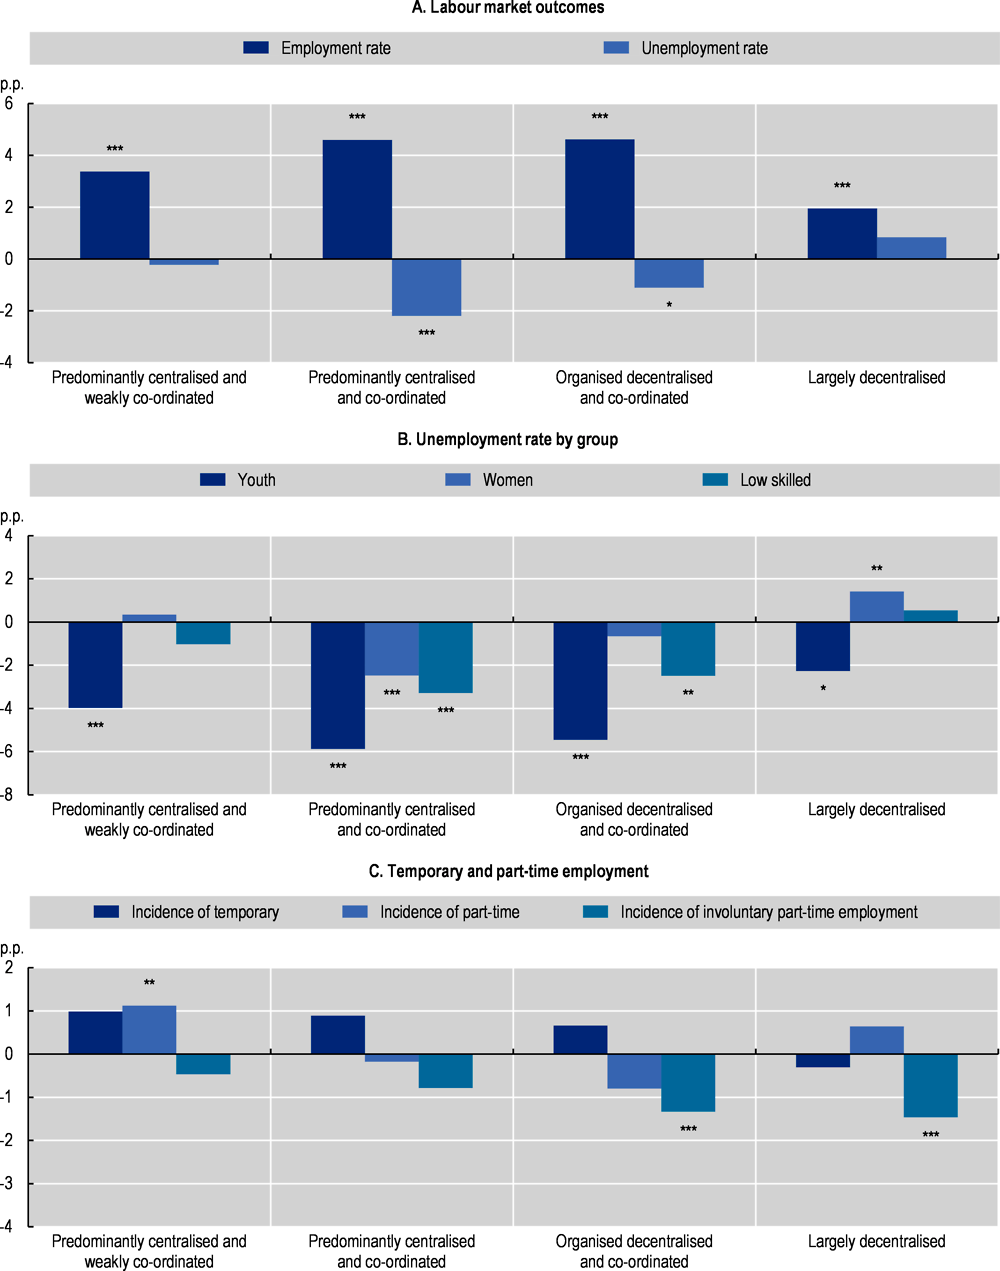 Figure 3.2. Collective bargaining systems and employment outcomes